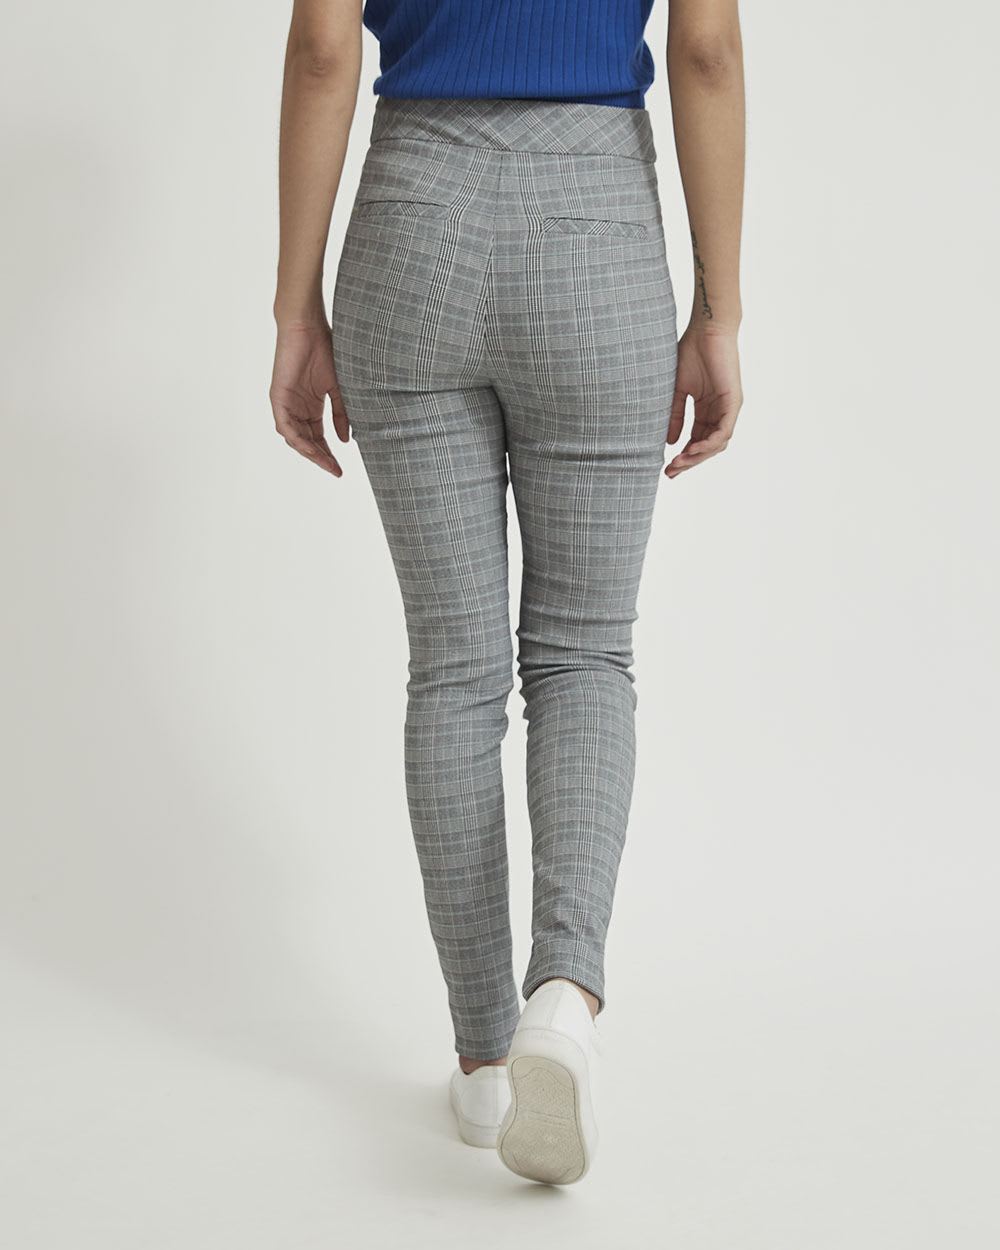 Checkered Teal Twill City Legging Pant